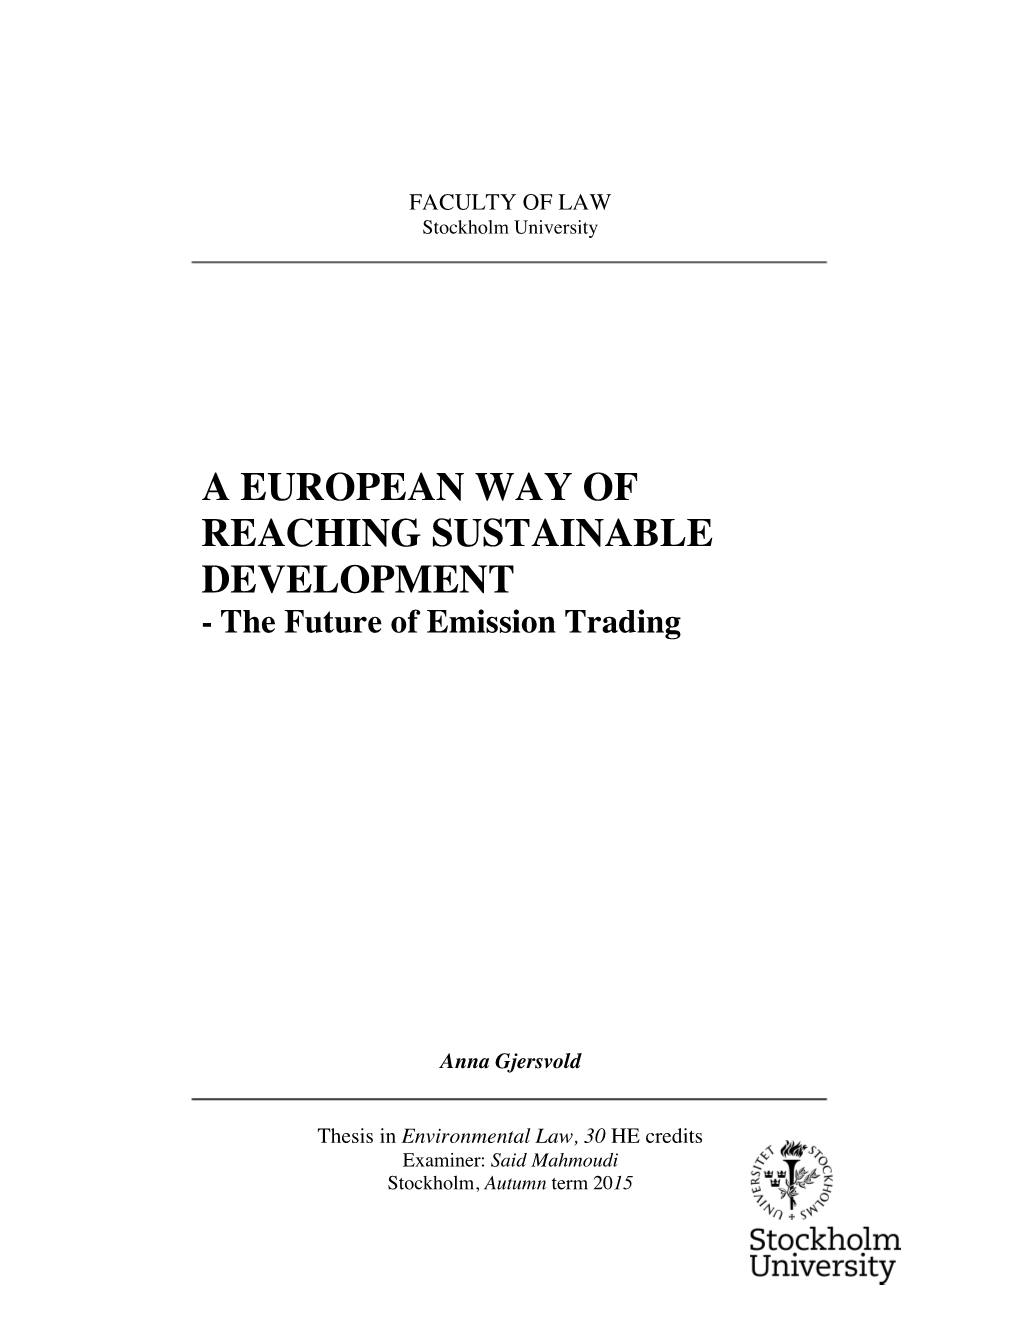 A EUROPEAN WAY of REACHING SUSTAINABLE DEVELOPMENT - the Future of Emission Trading